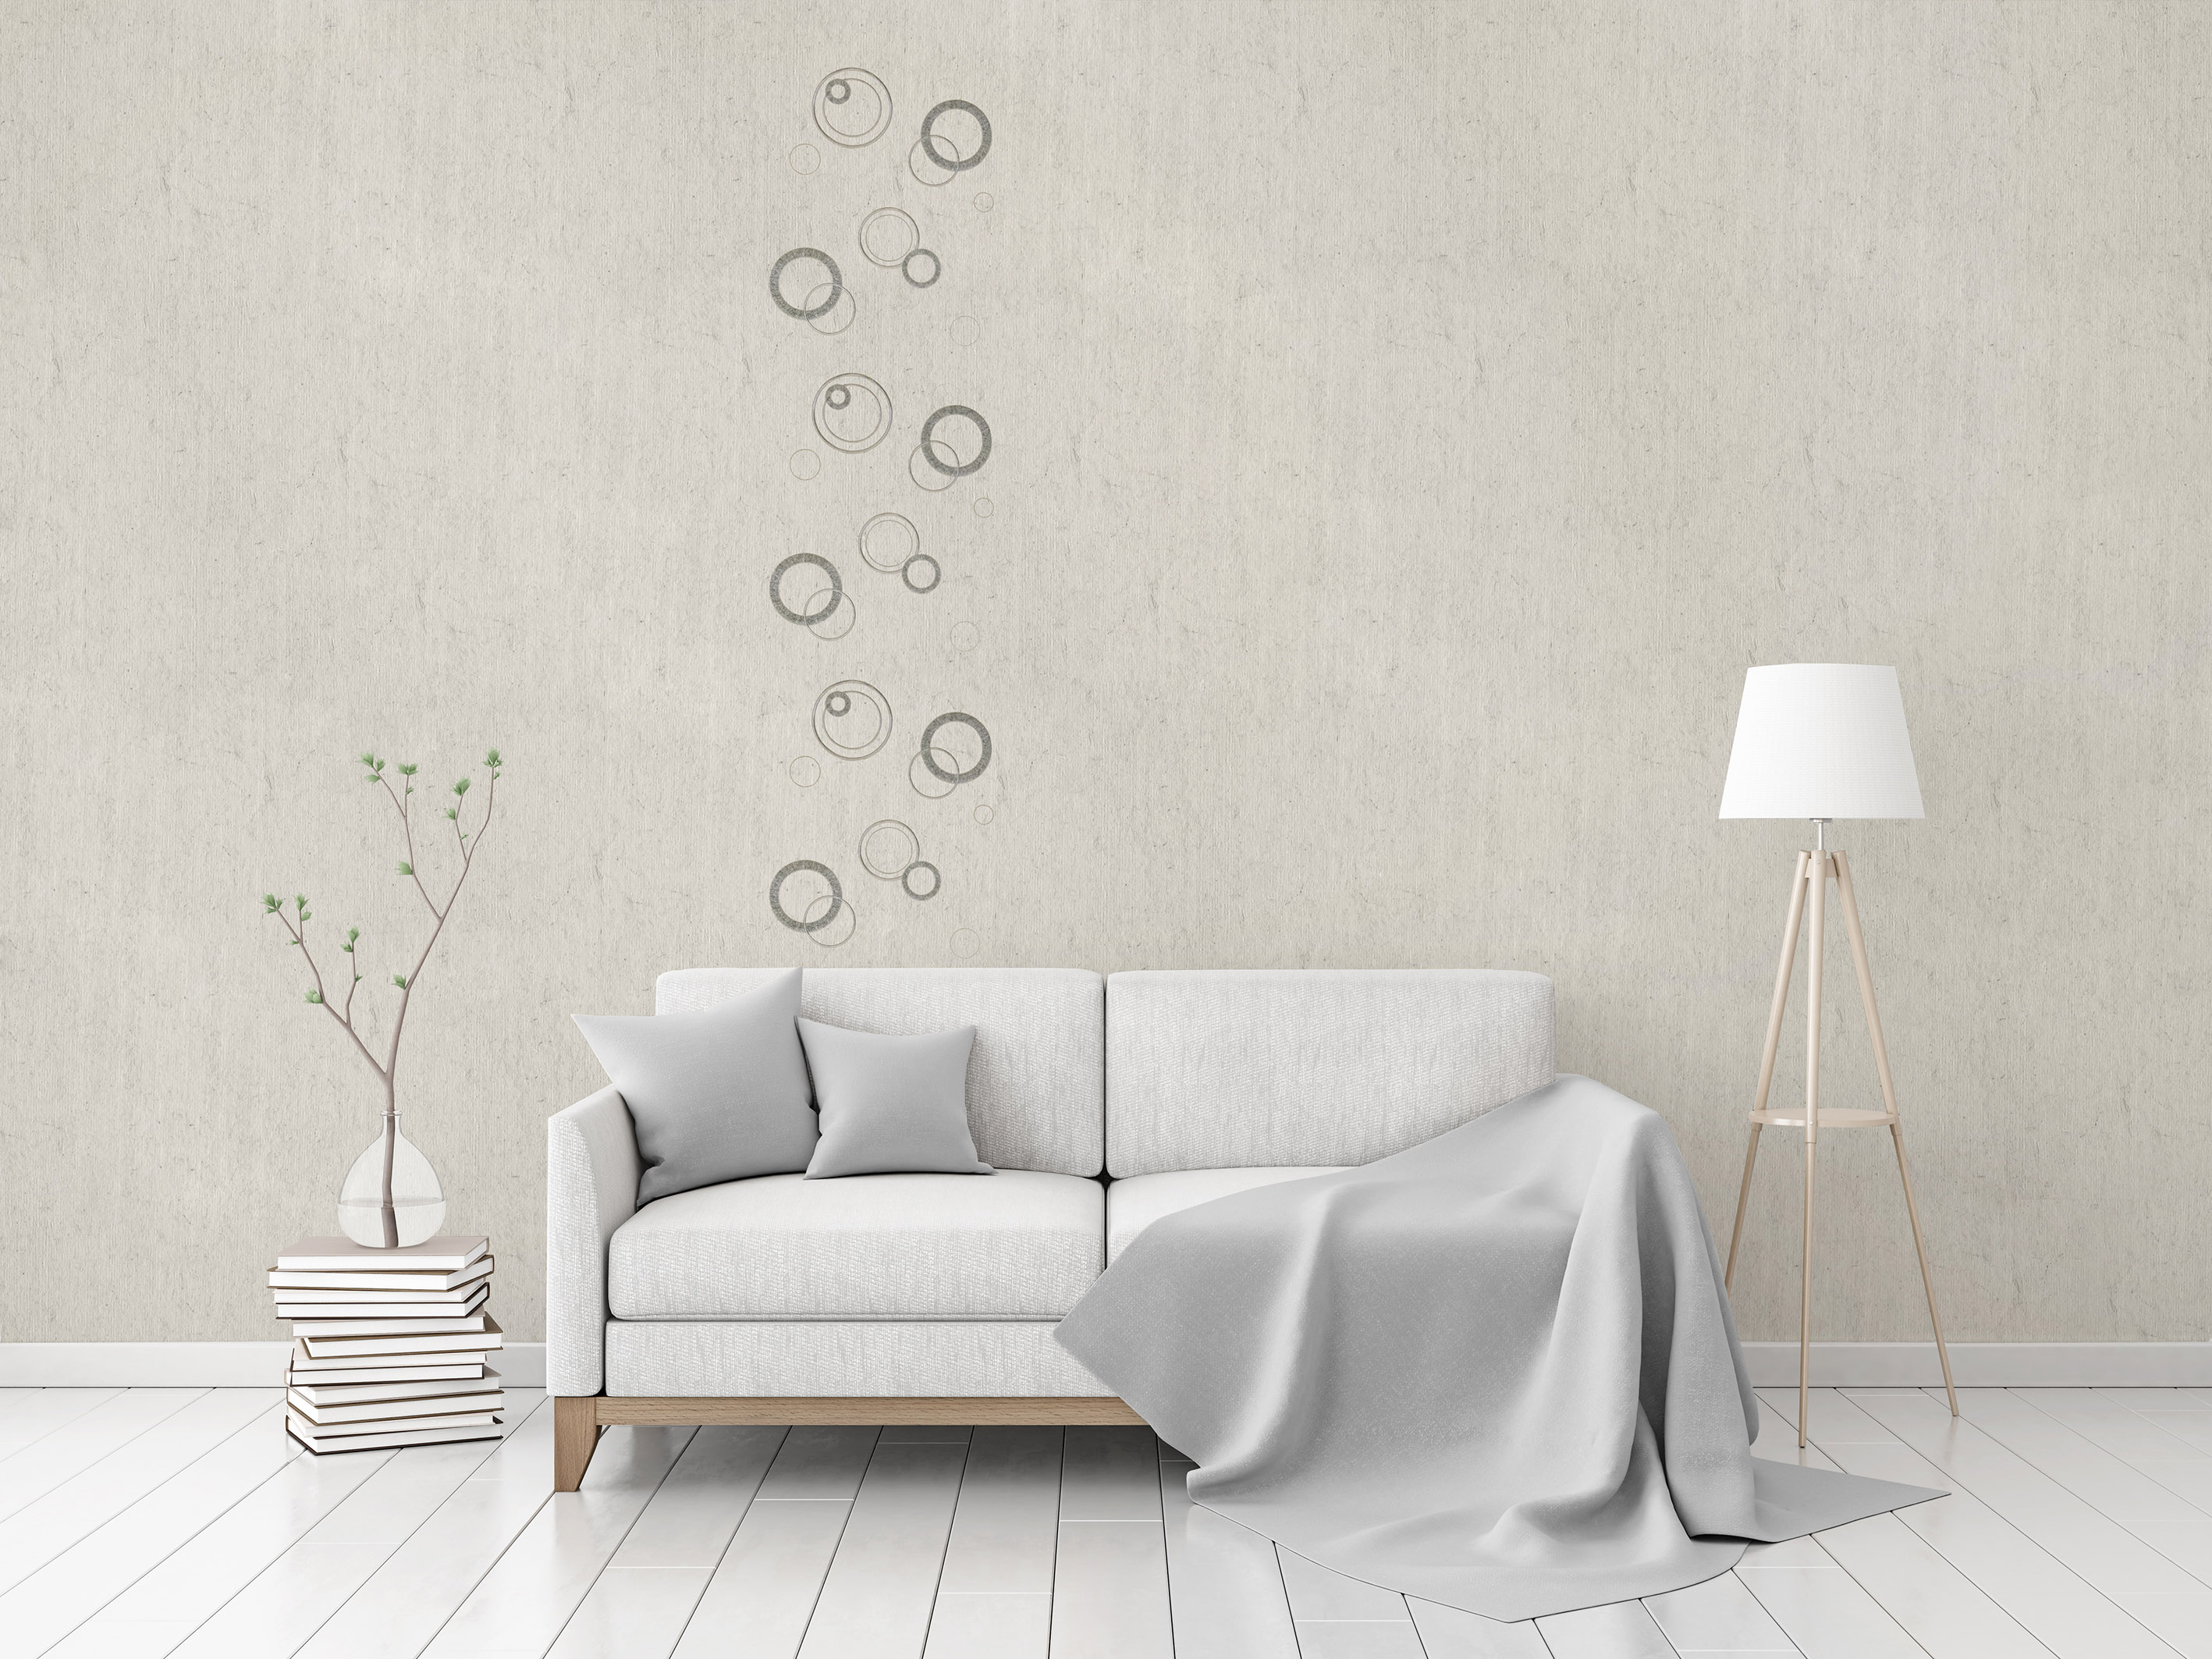 Flax Wallpaper embroidered “circles”, light gray